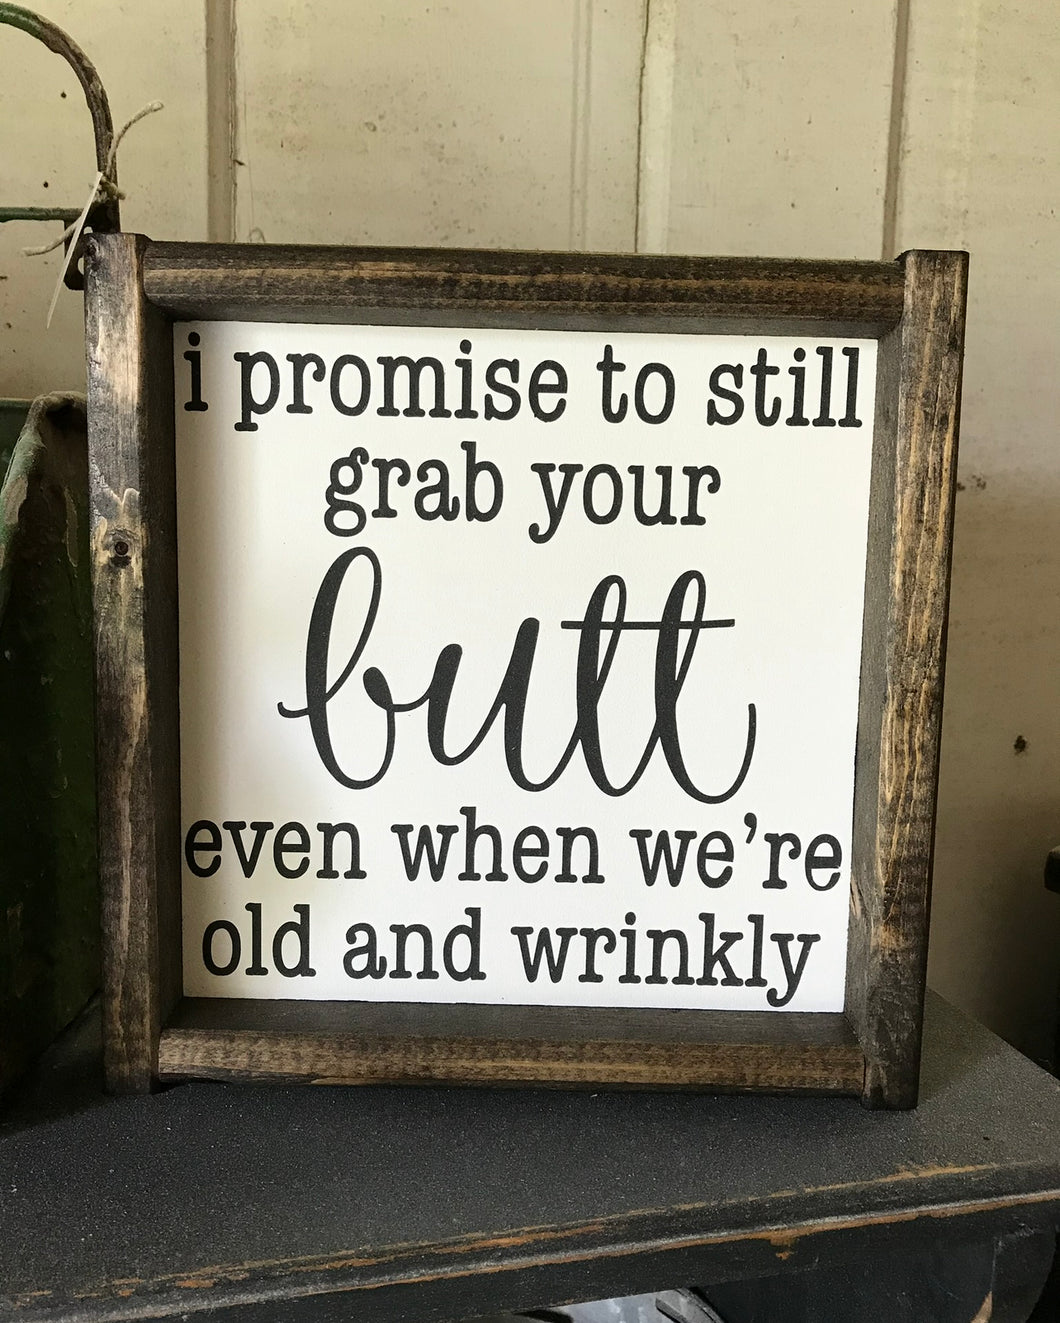 I promise to still grab your butt